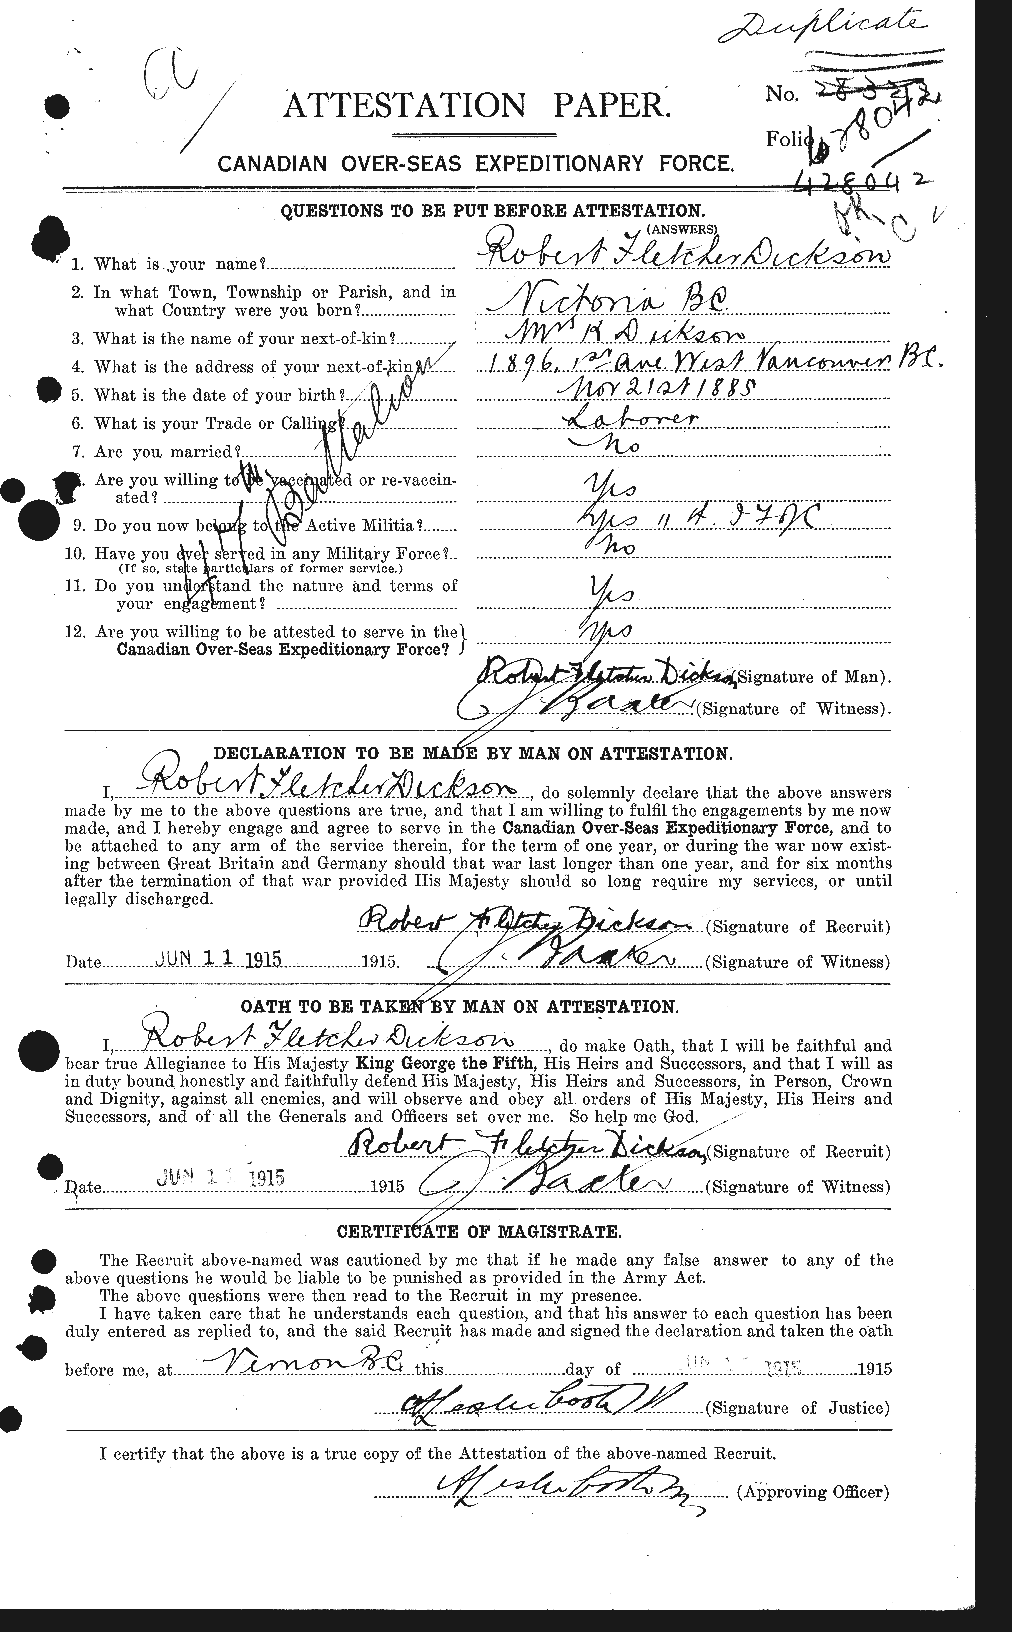 Personnel Records of the First World War - CEF 291651a